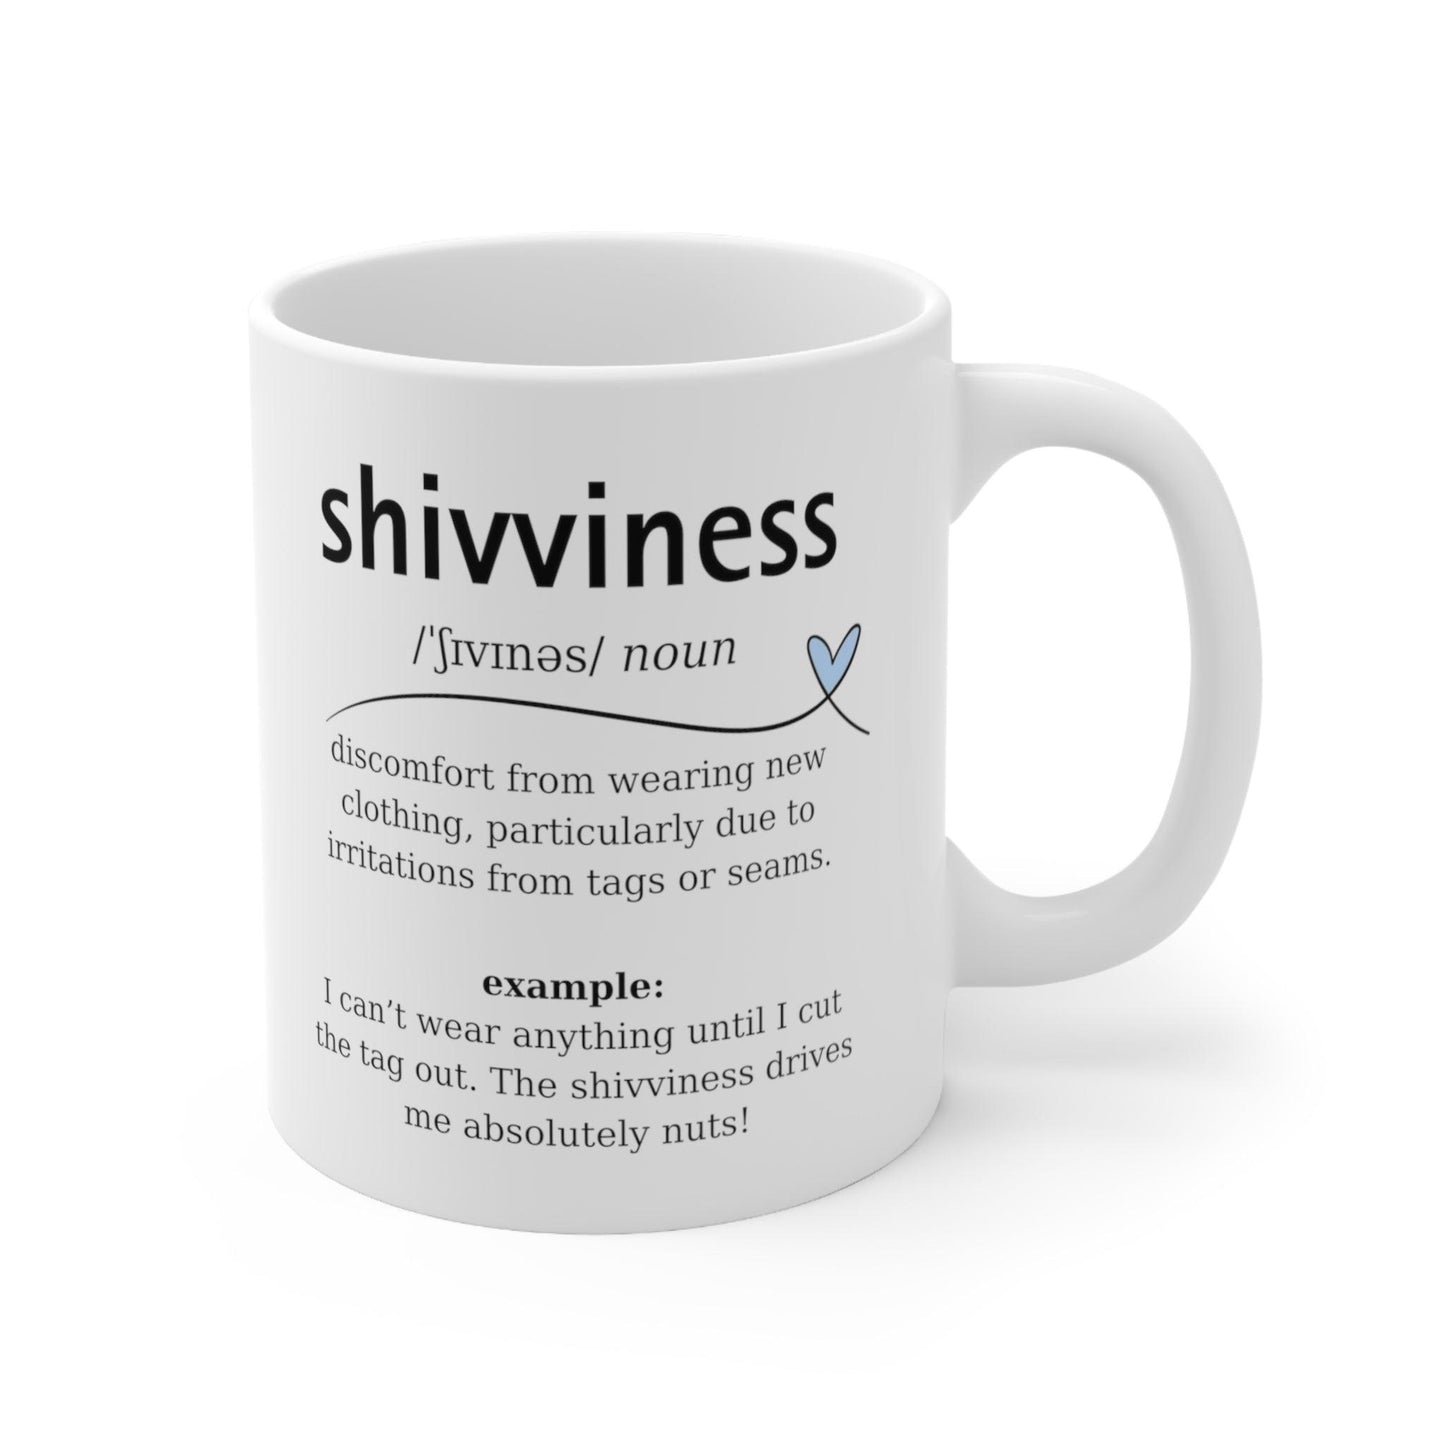 Shivviness Meaning: ADHD Dictionary Definition Mug - Fidget and Focus